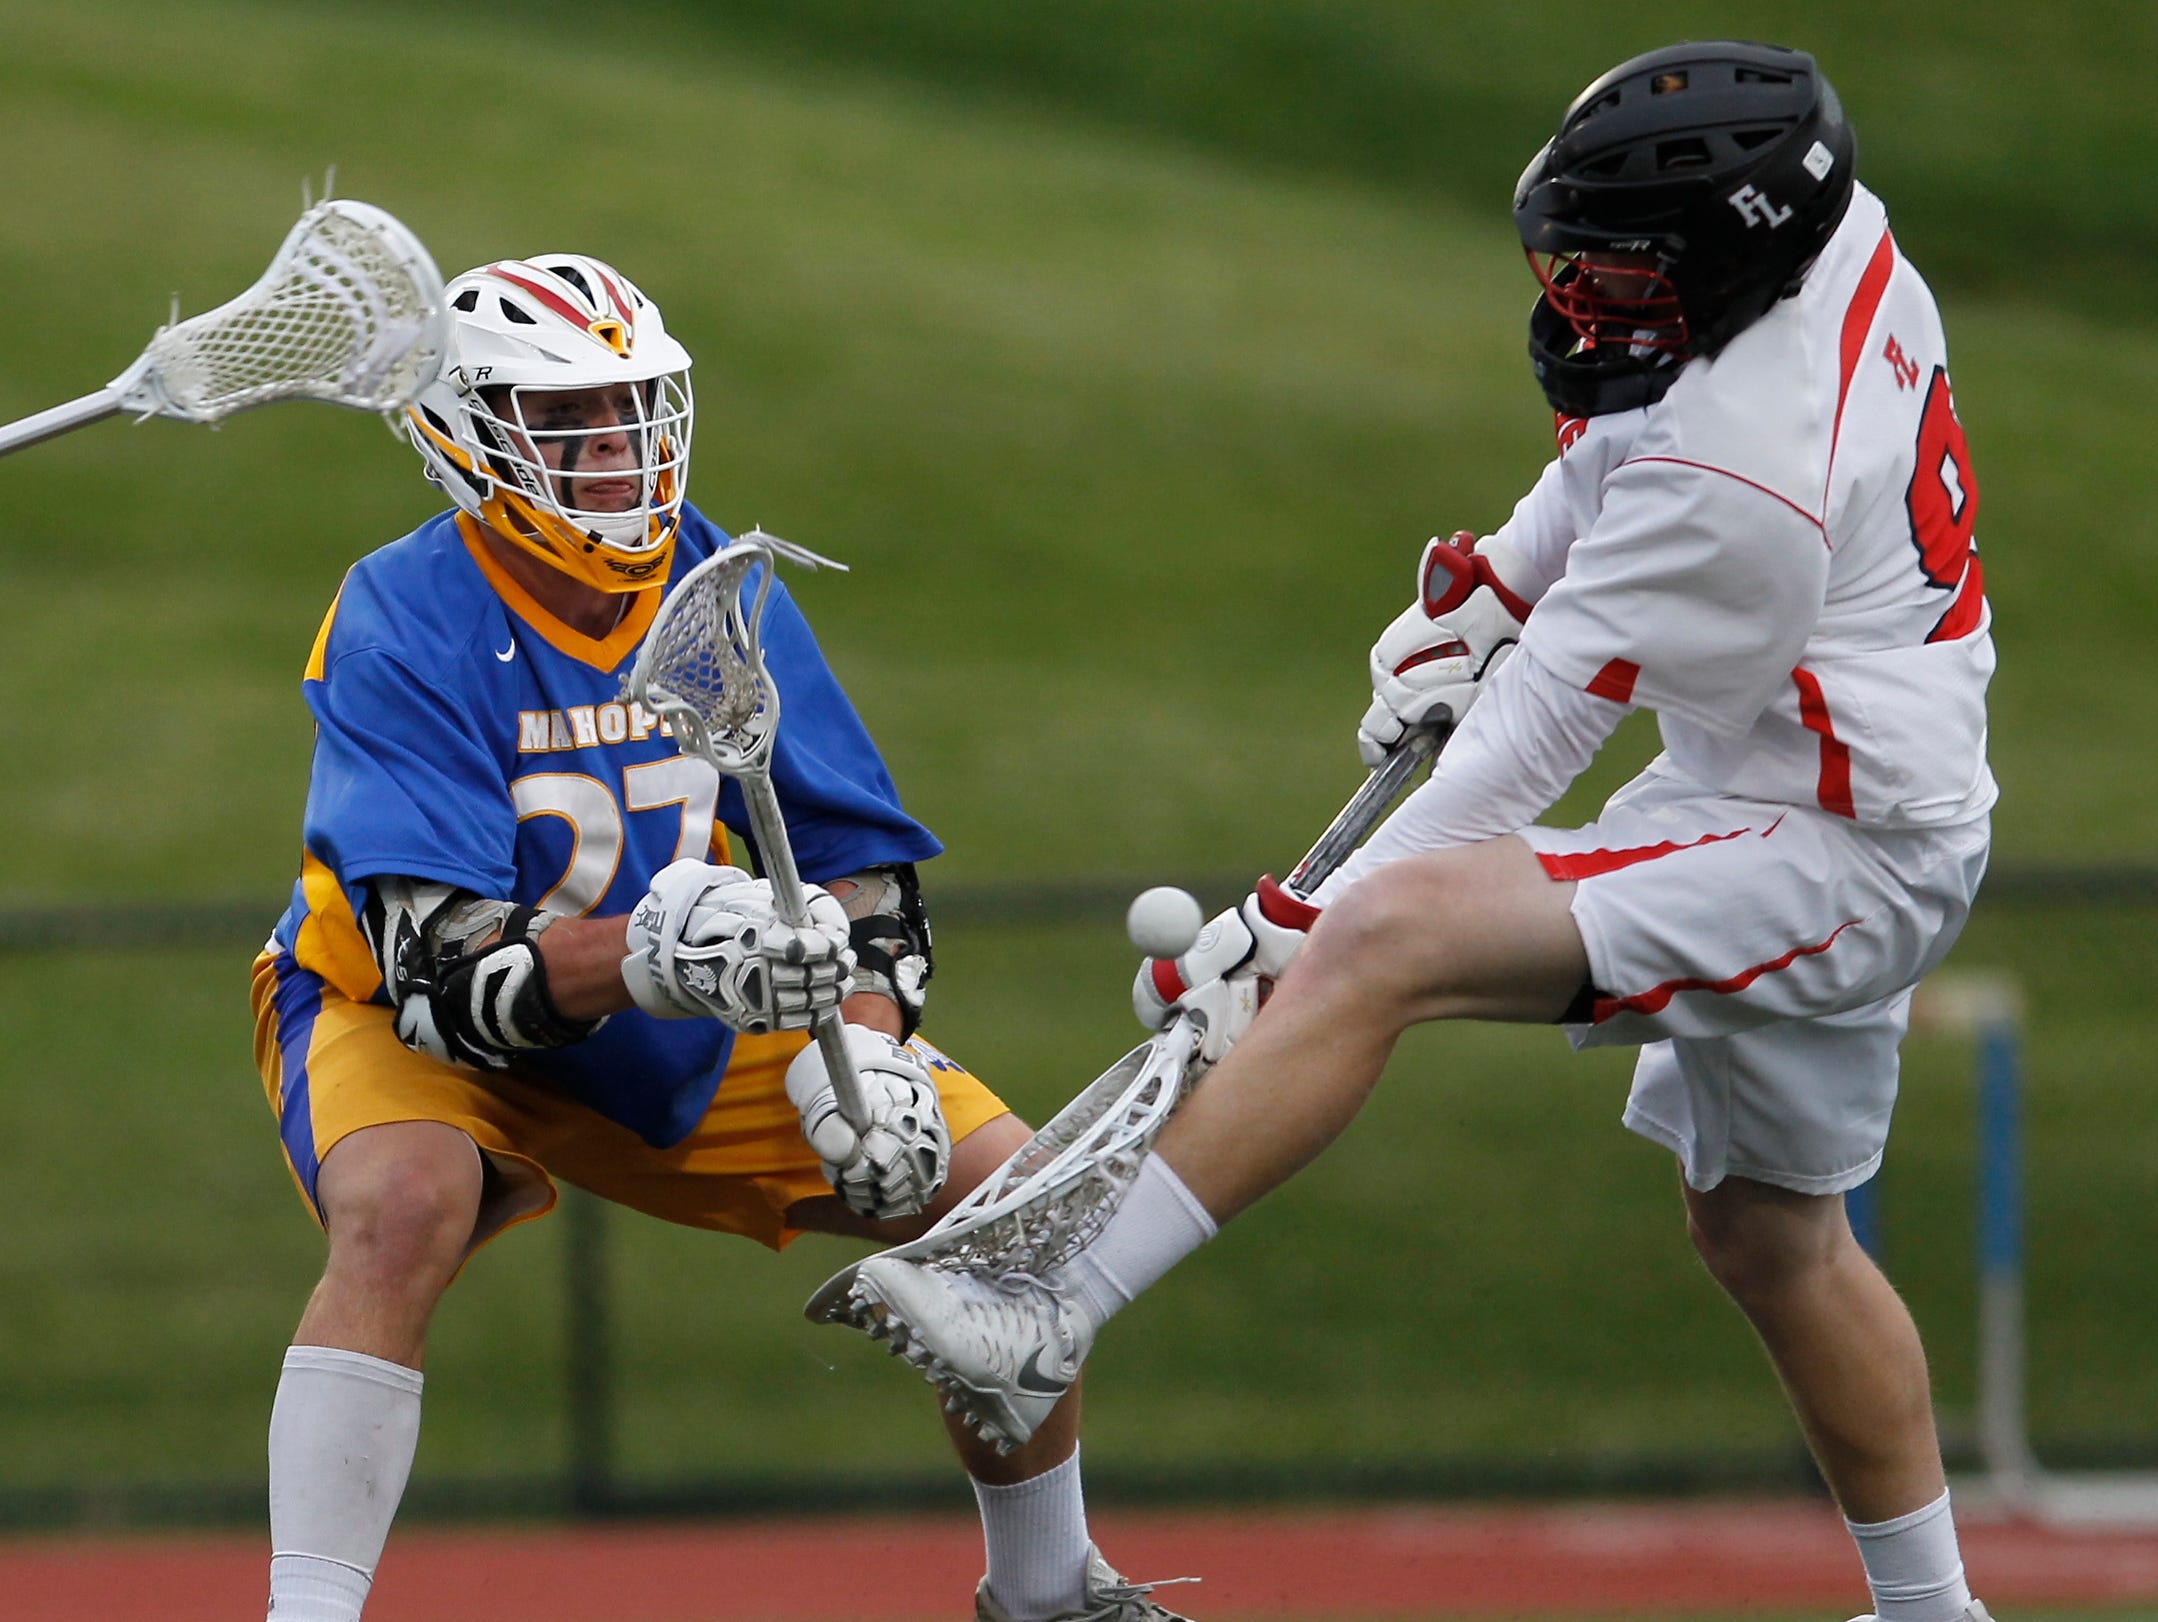 Mahopac's Johnnie Ward (27) slips a shot past Fox Lane goalie Colin Smith (9) during the class A quarterfinal boys lacrosse game at Fox Lane High School in Bedford on Wednesday, May 18, 2016.